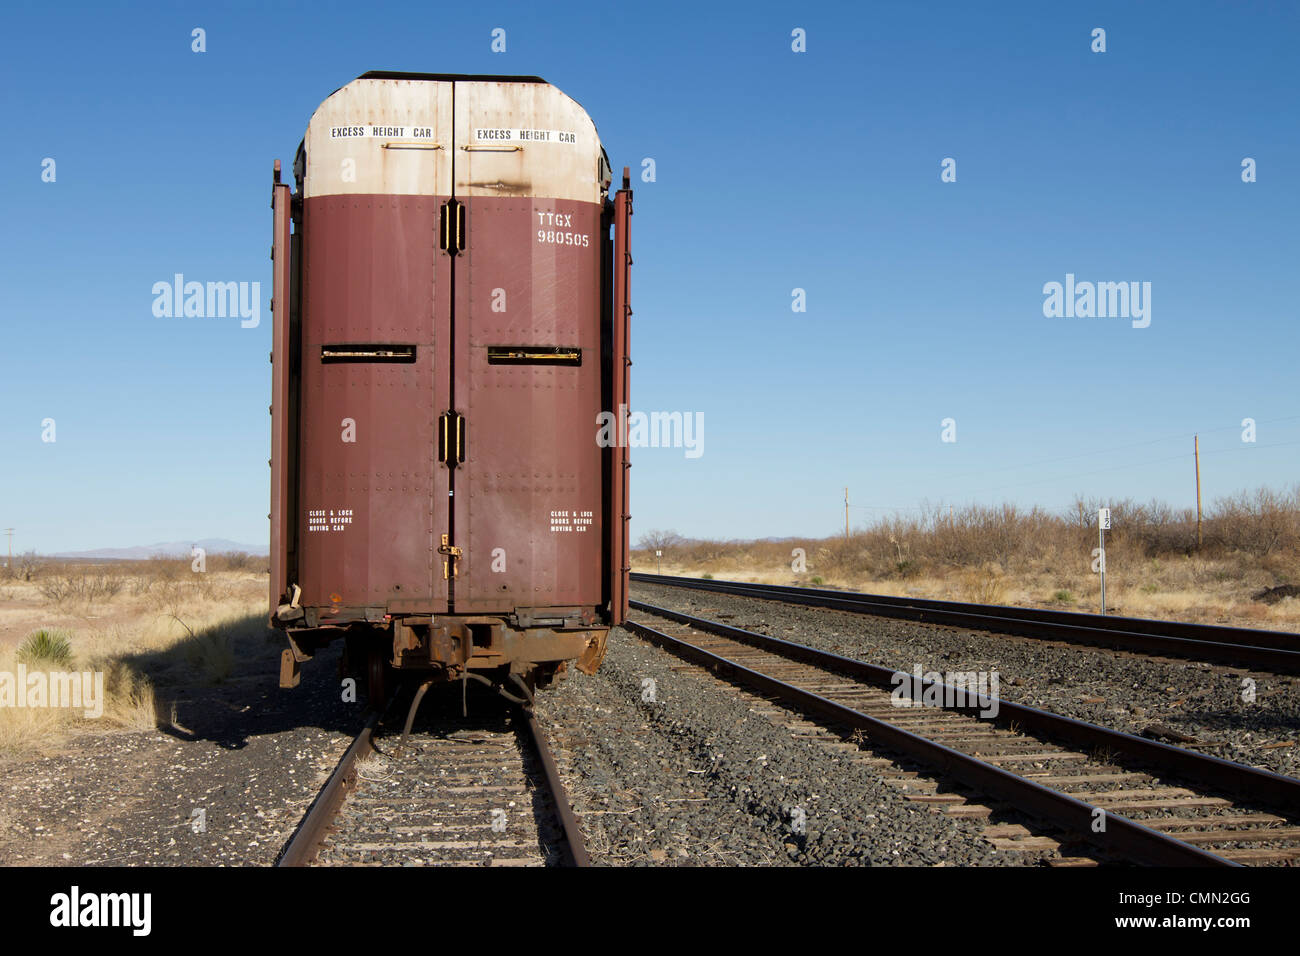 Railroad car designed to transport automobiles parked in rural west Texas. Stock Photo